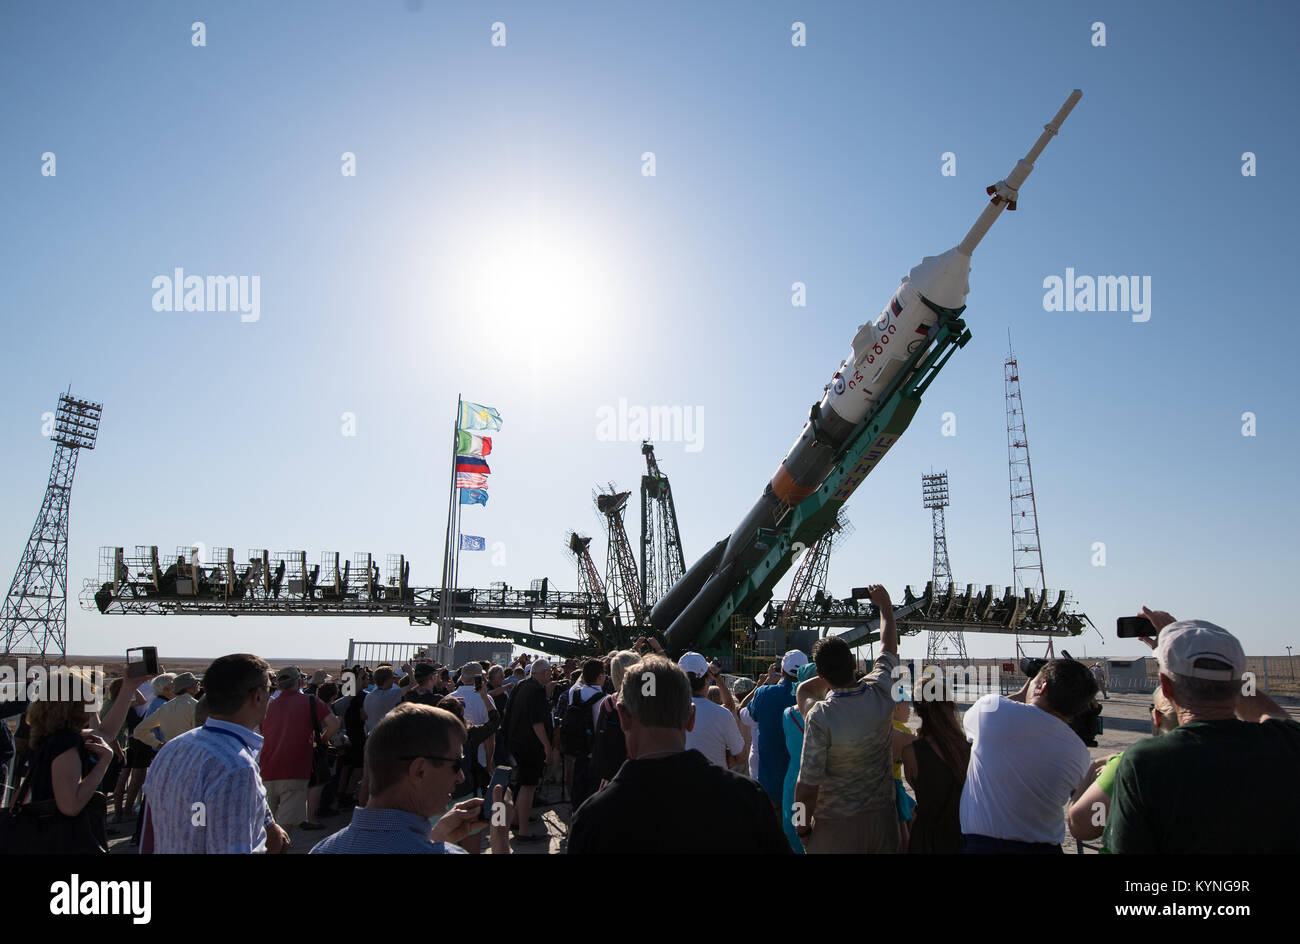 The Soyuz MS-05 spacecraft is seen on the launch pad after being rolled out by train at the Baikonur Cosmodrome, Kazakhstan, Wednesday, July 26, 2017.  Expedition 52 flight engineer Sergei Ryazanskiy of Roscosmos, flight engineer Randy Bresnik of NASA, and flight engineer Paolo Nespoli of ESA (European Space Agency), are scheduled to launch to the International Space Station aboard the Soyuz spacecraft from the Baikonur Cosmodrome on July 28.  Photo Credit: (NASA/Joel Kowsky) Stock Photo